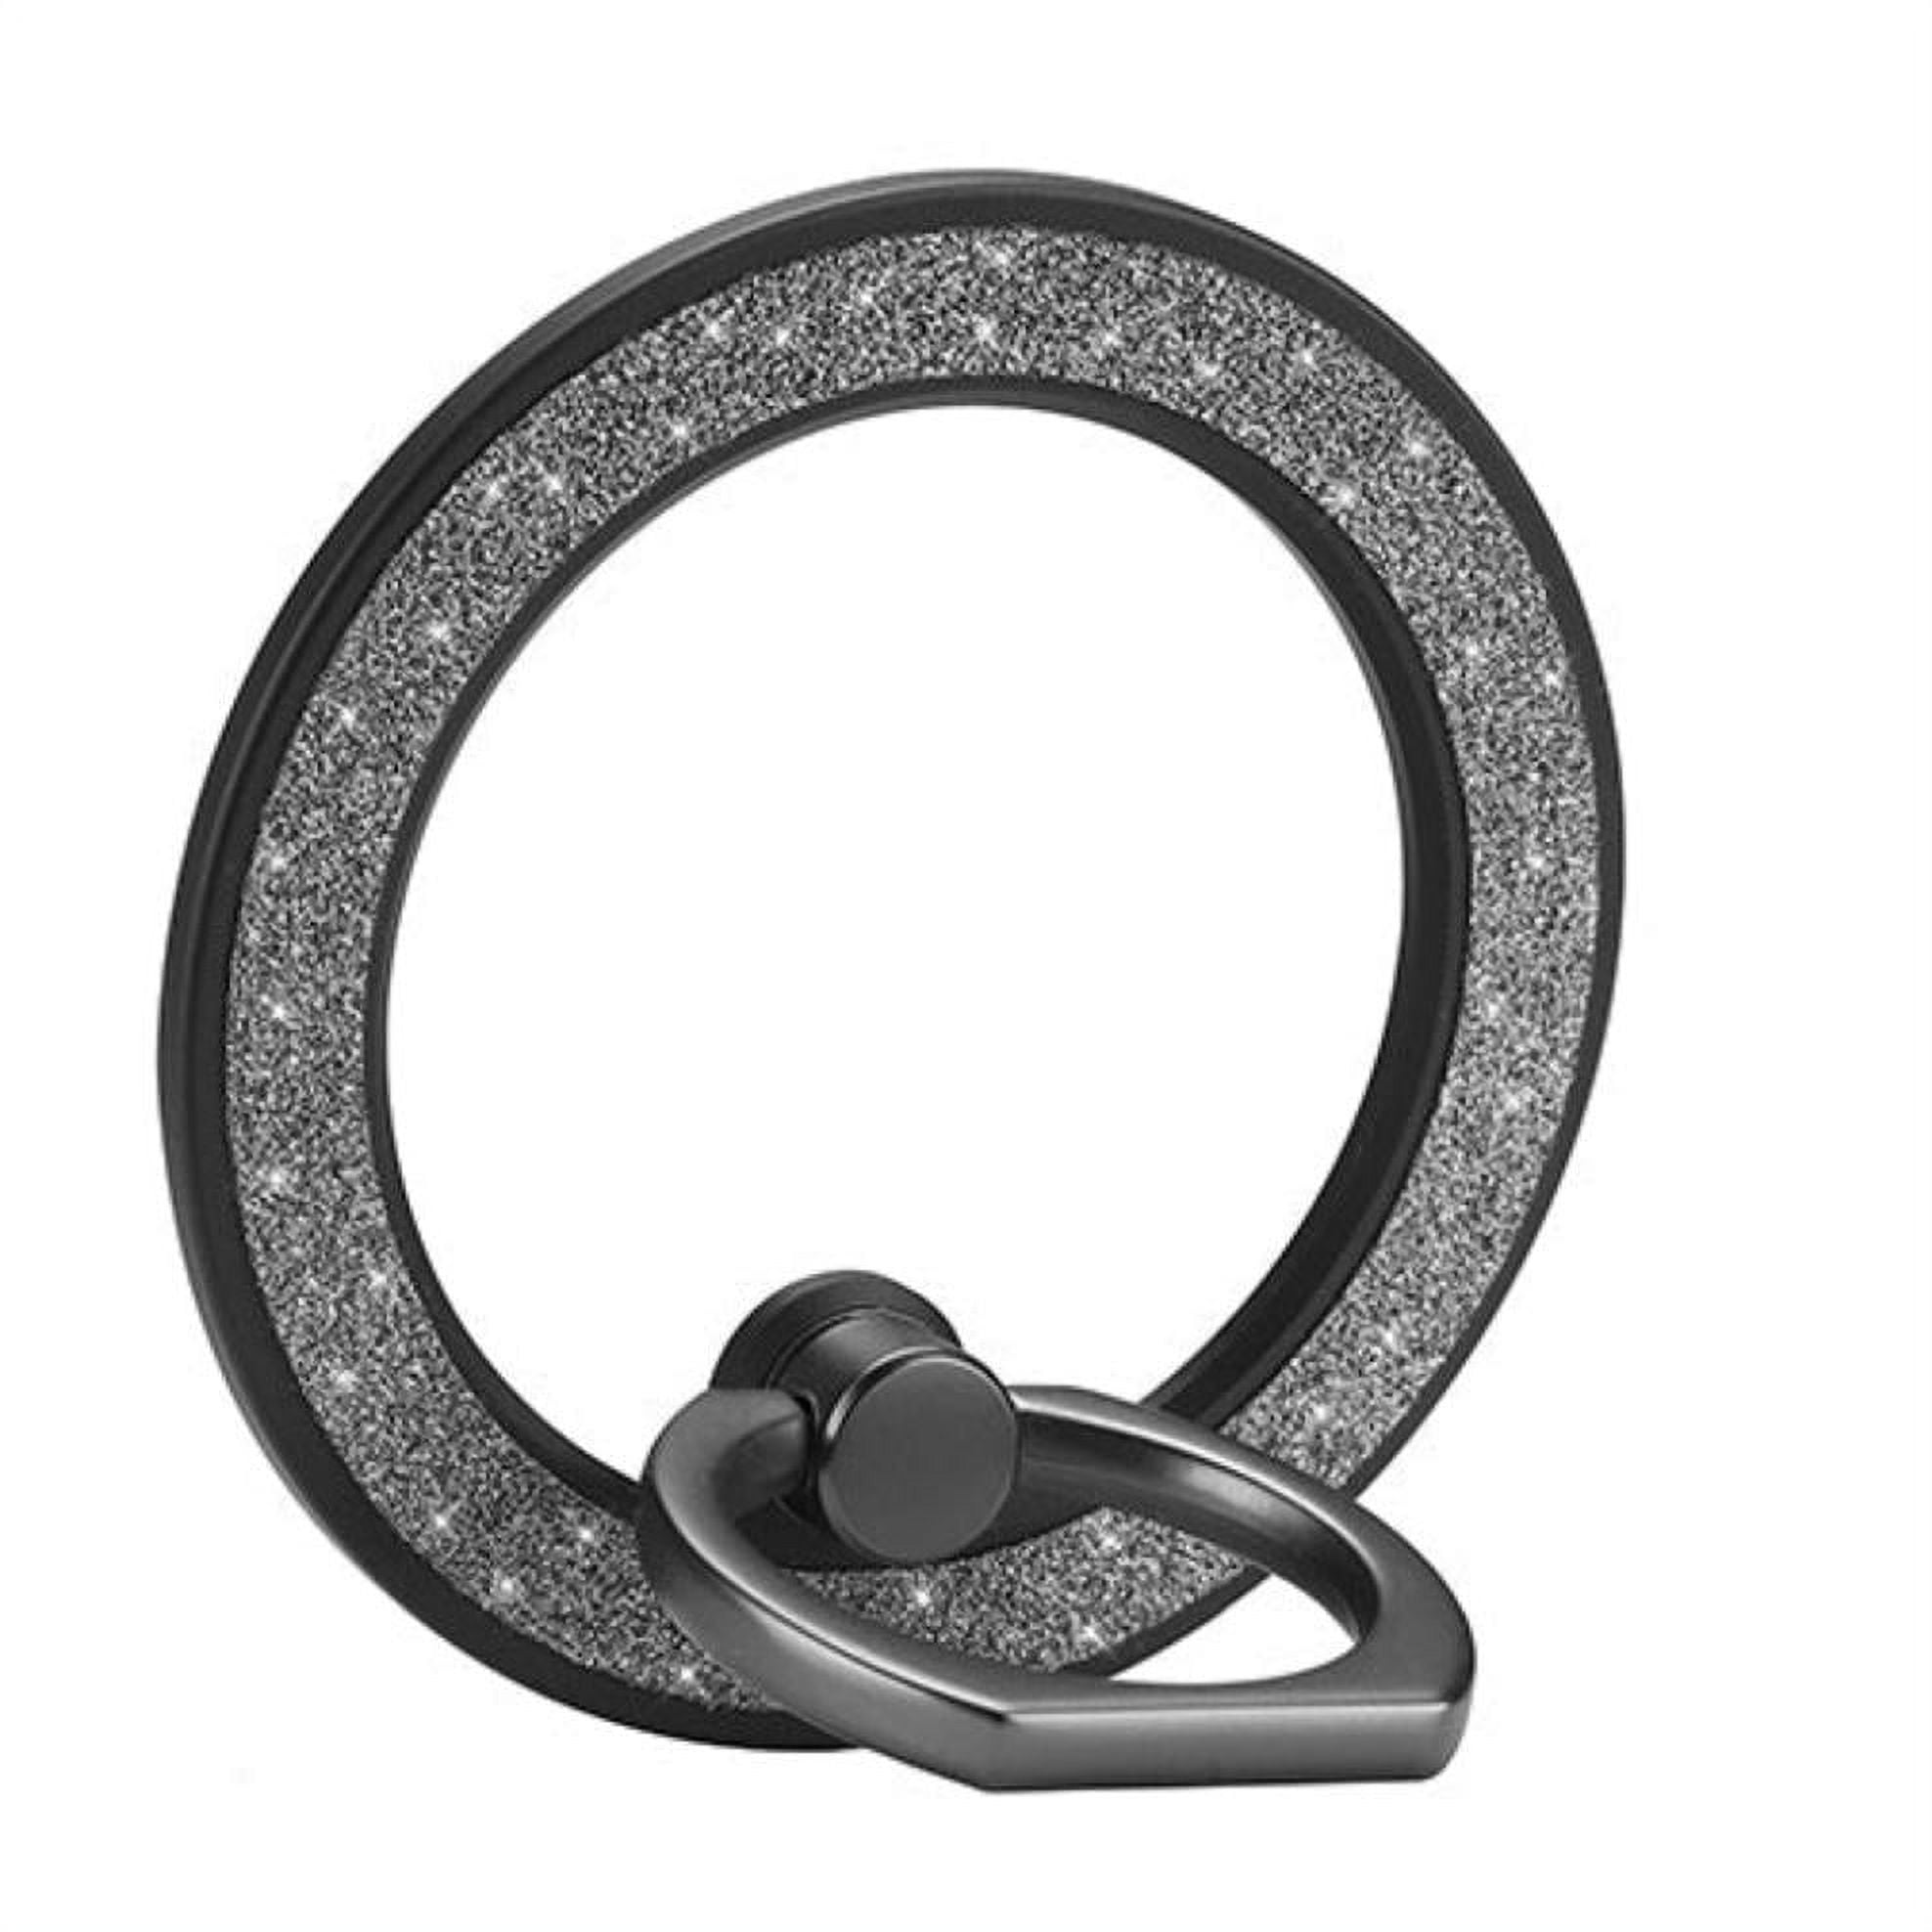 Accessory - Phone Ring/Stand